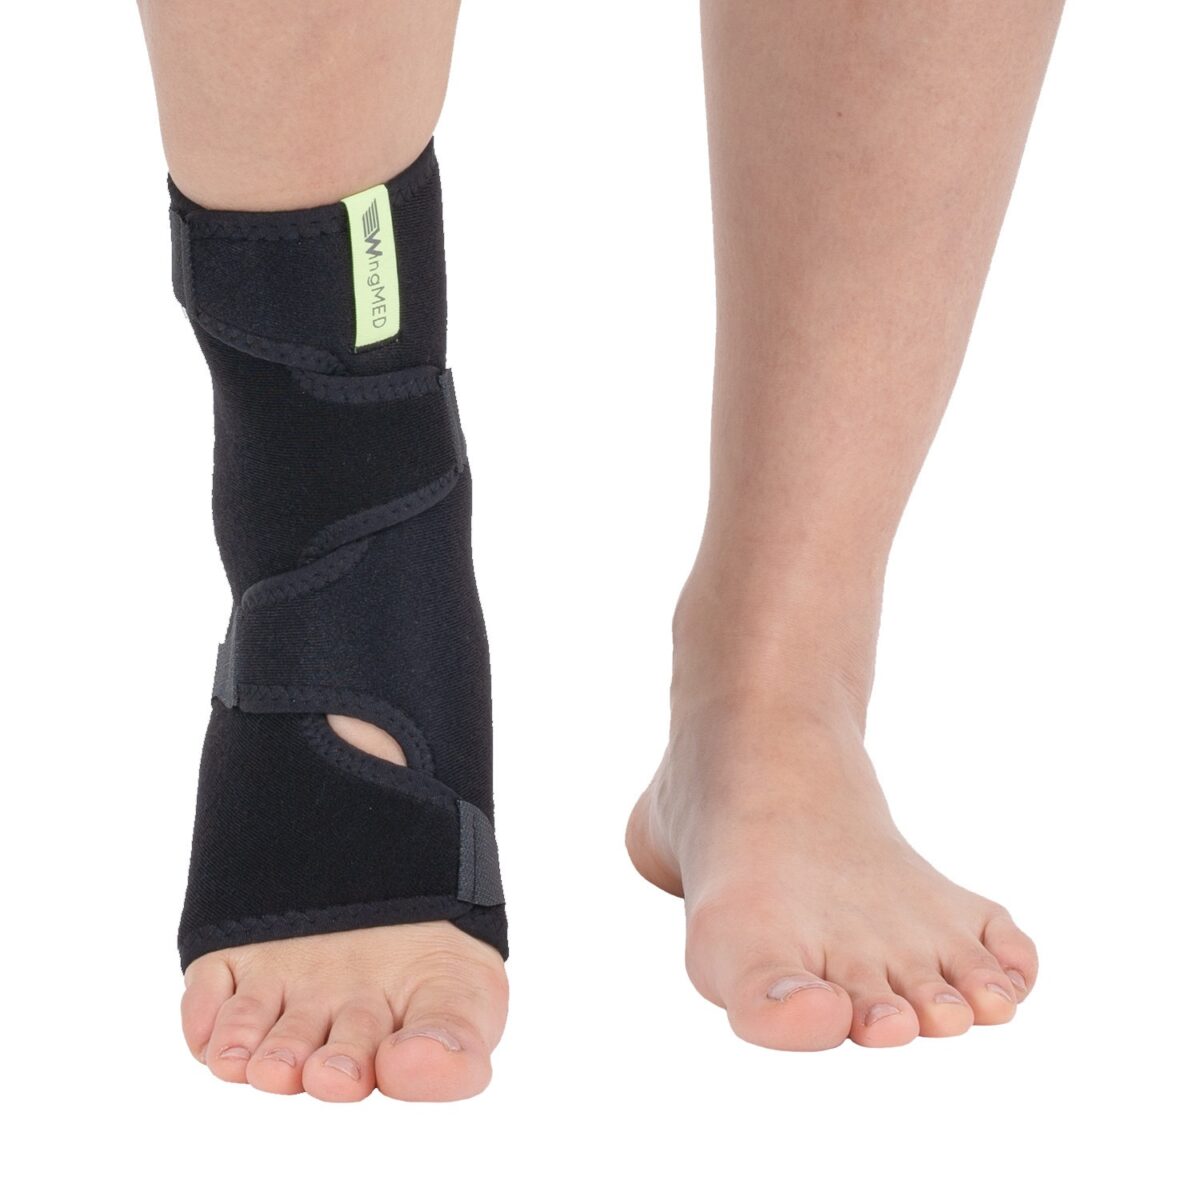 wingmed orthopedic equipments W603 ankle support with strap 79 1